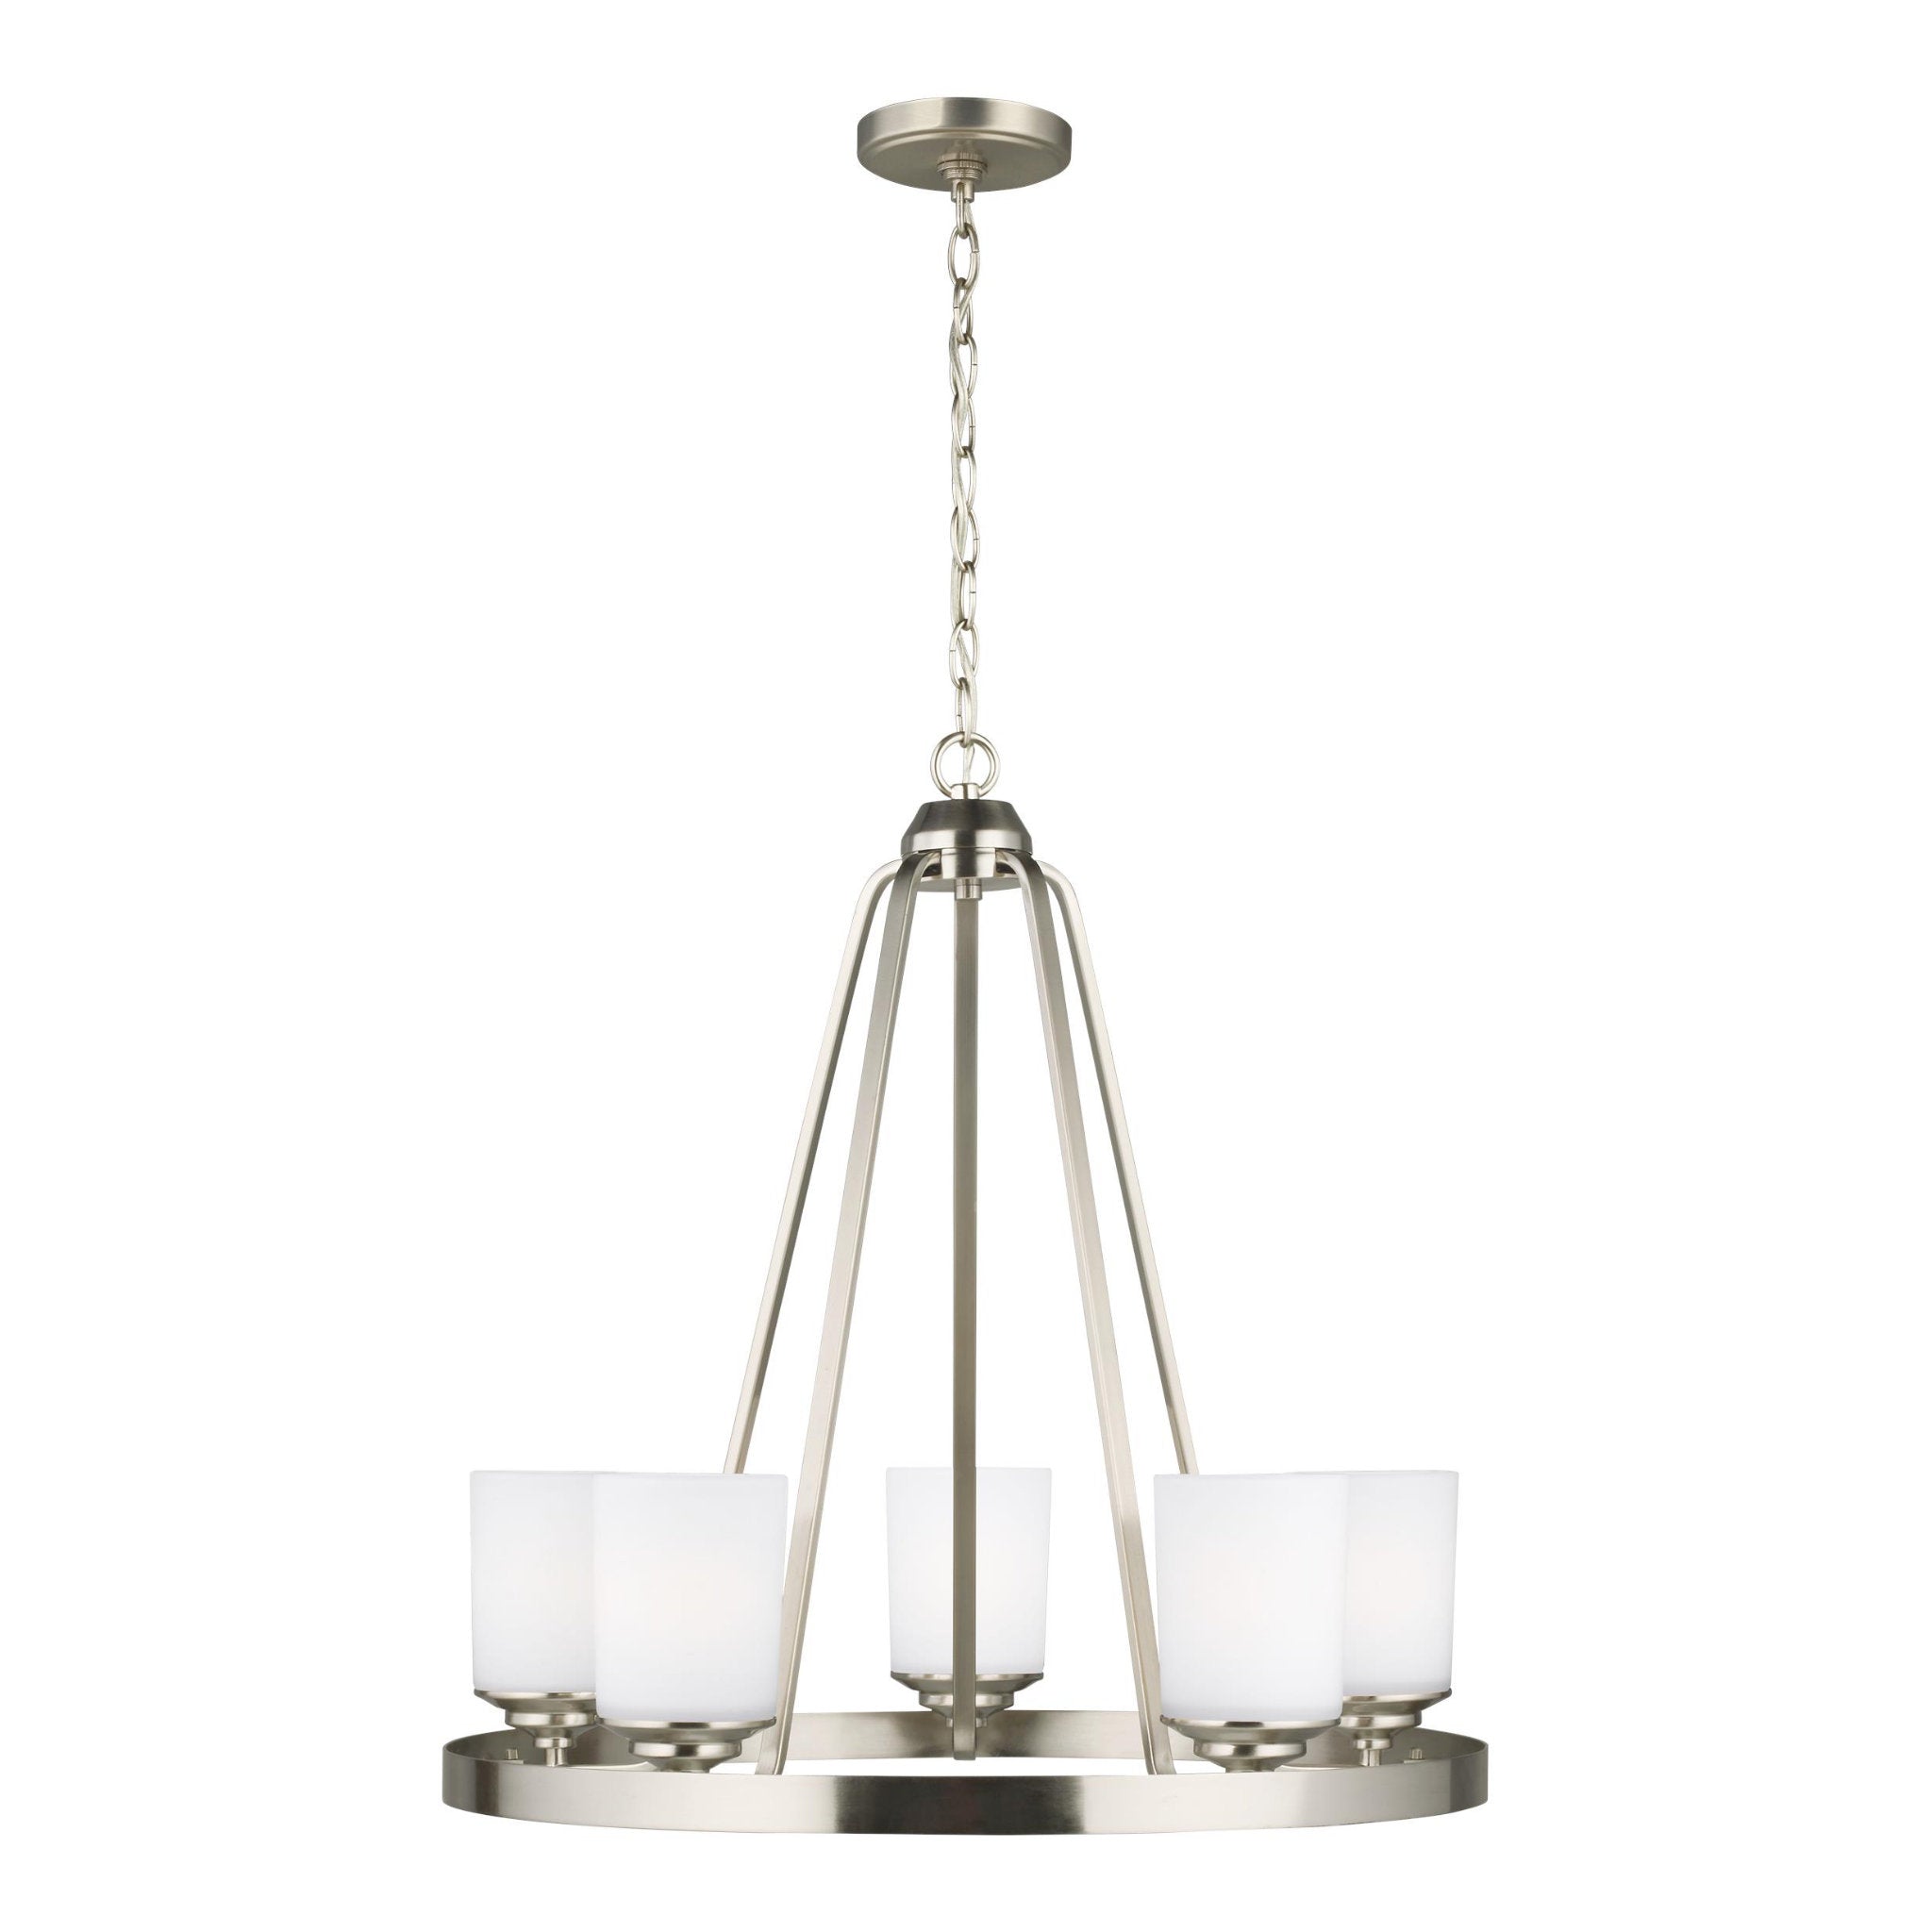 Kemal Five Light Chandelier LED Transitional 24" Height Steel Round Etched / White Inside Shade in Brushed Nickel